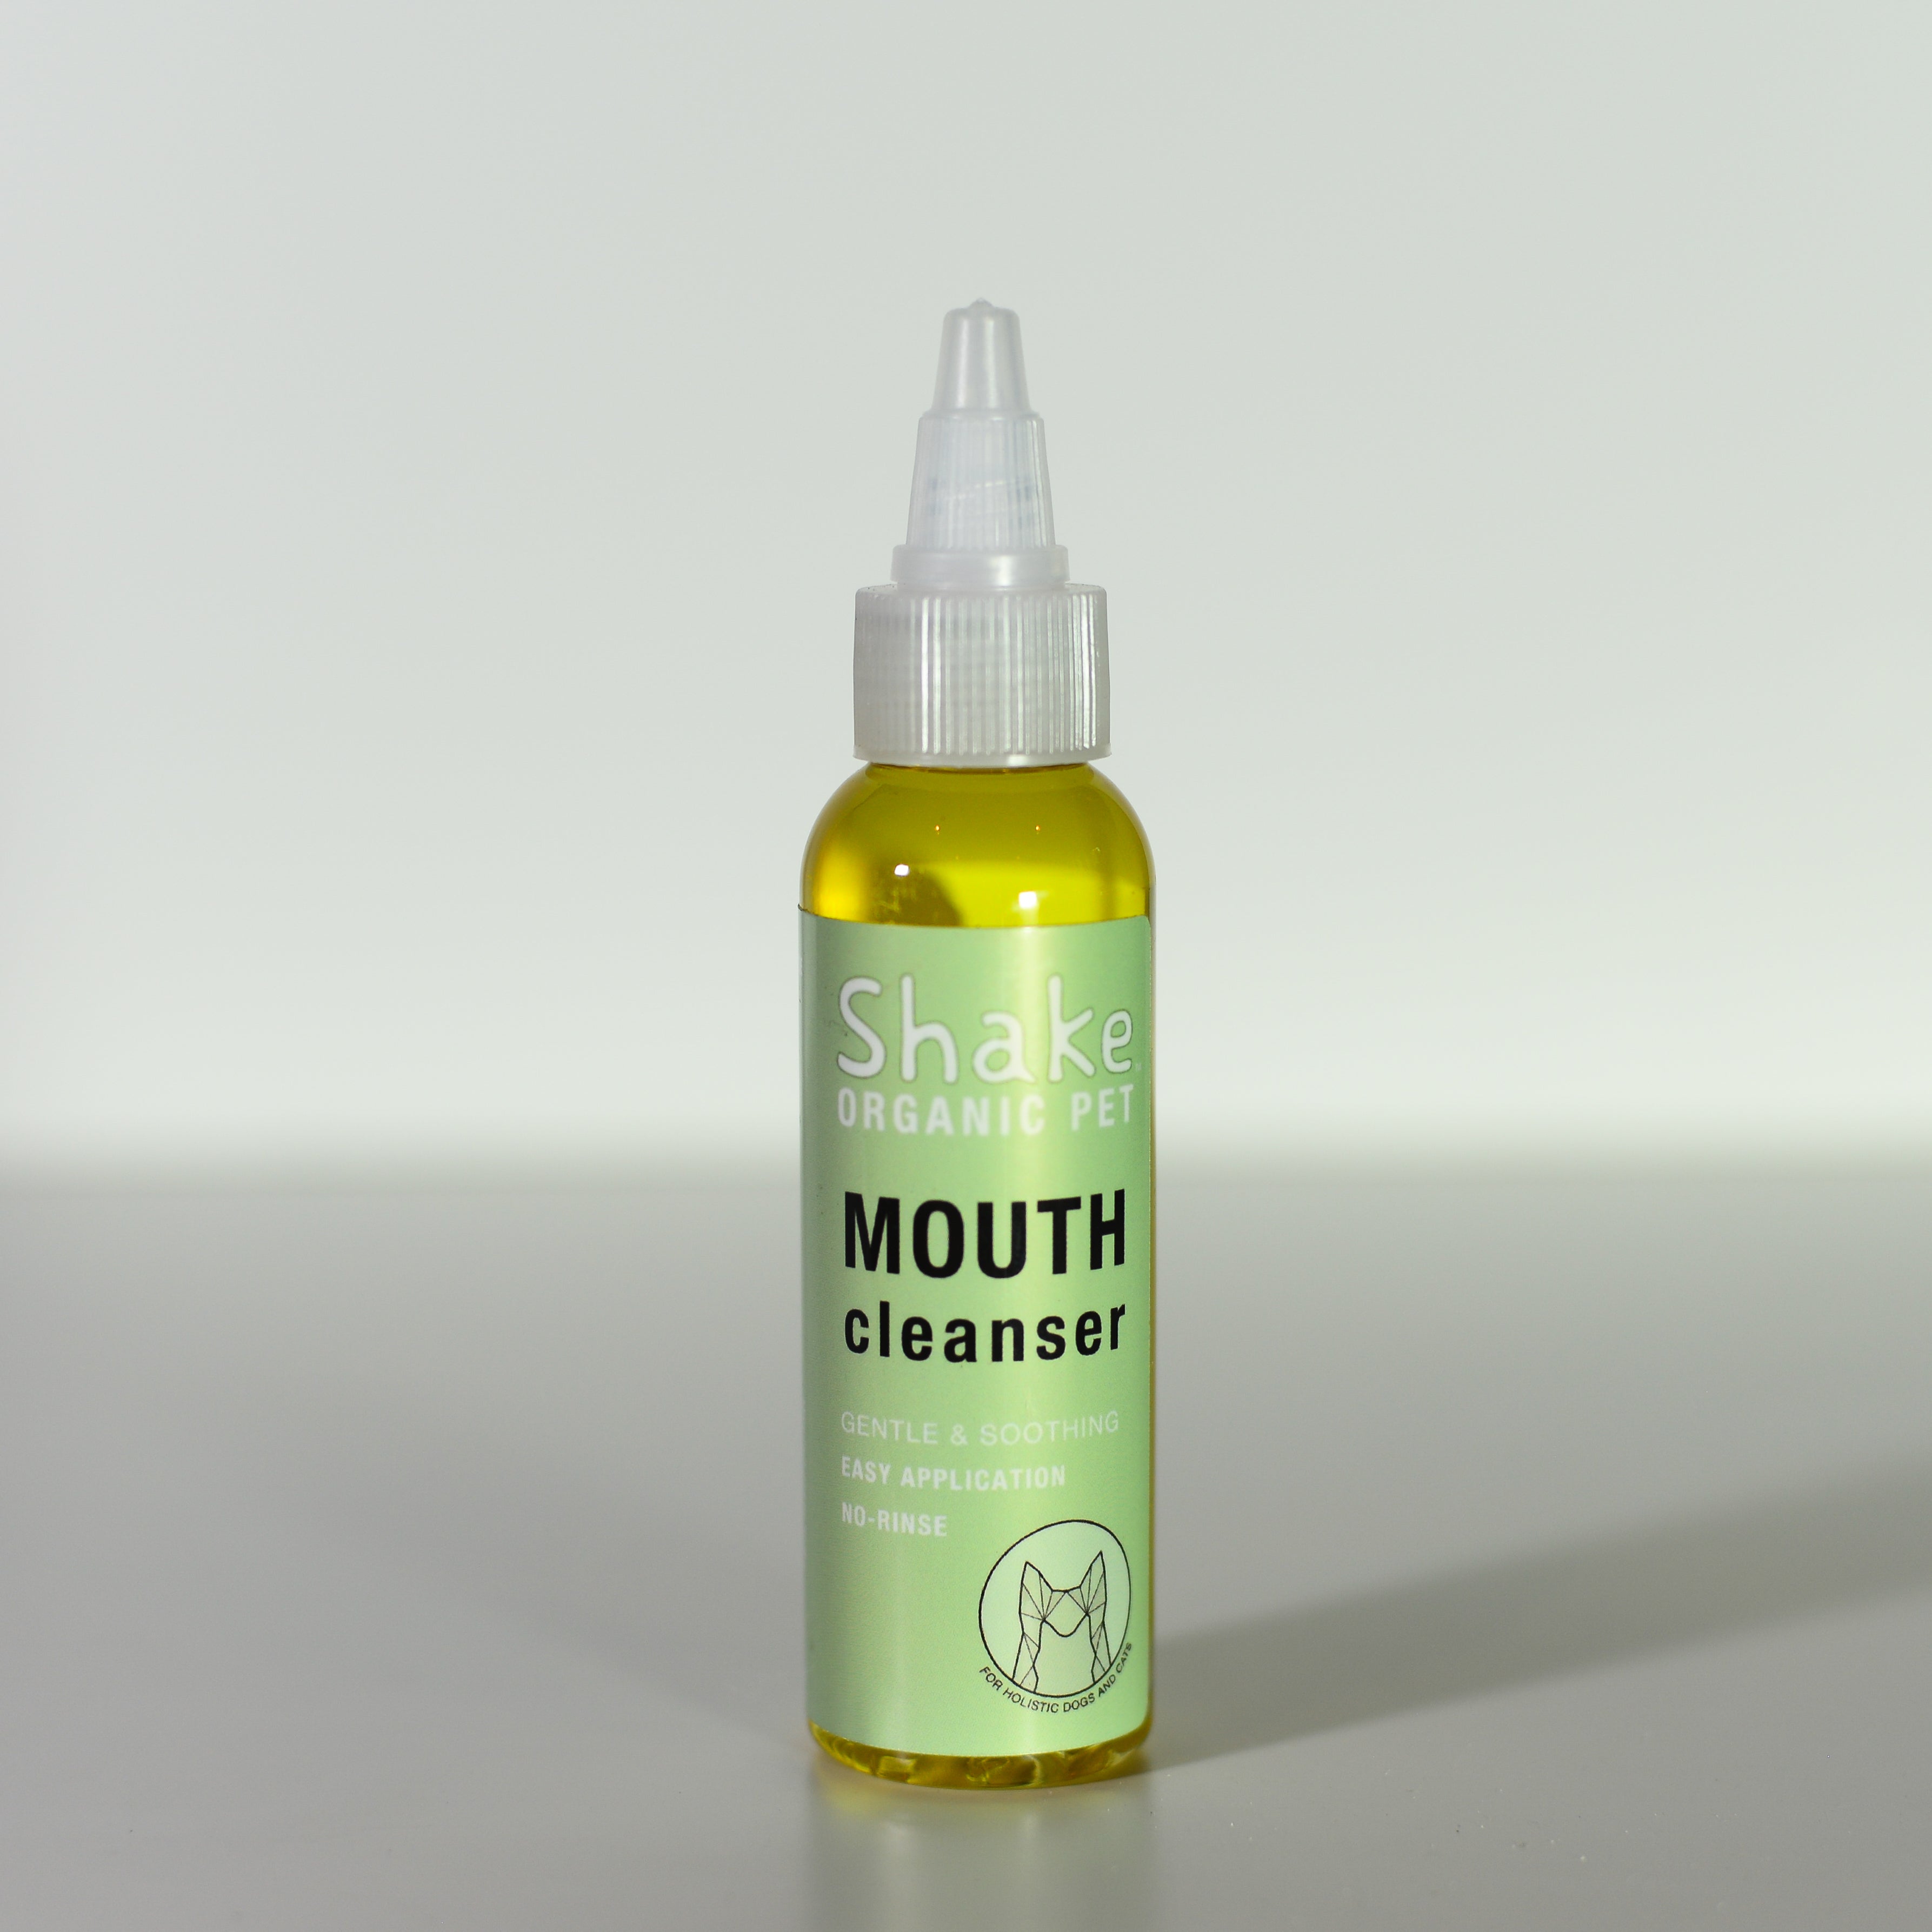 Mouth Cleanser